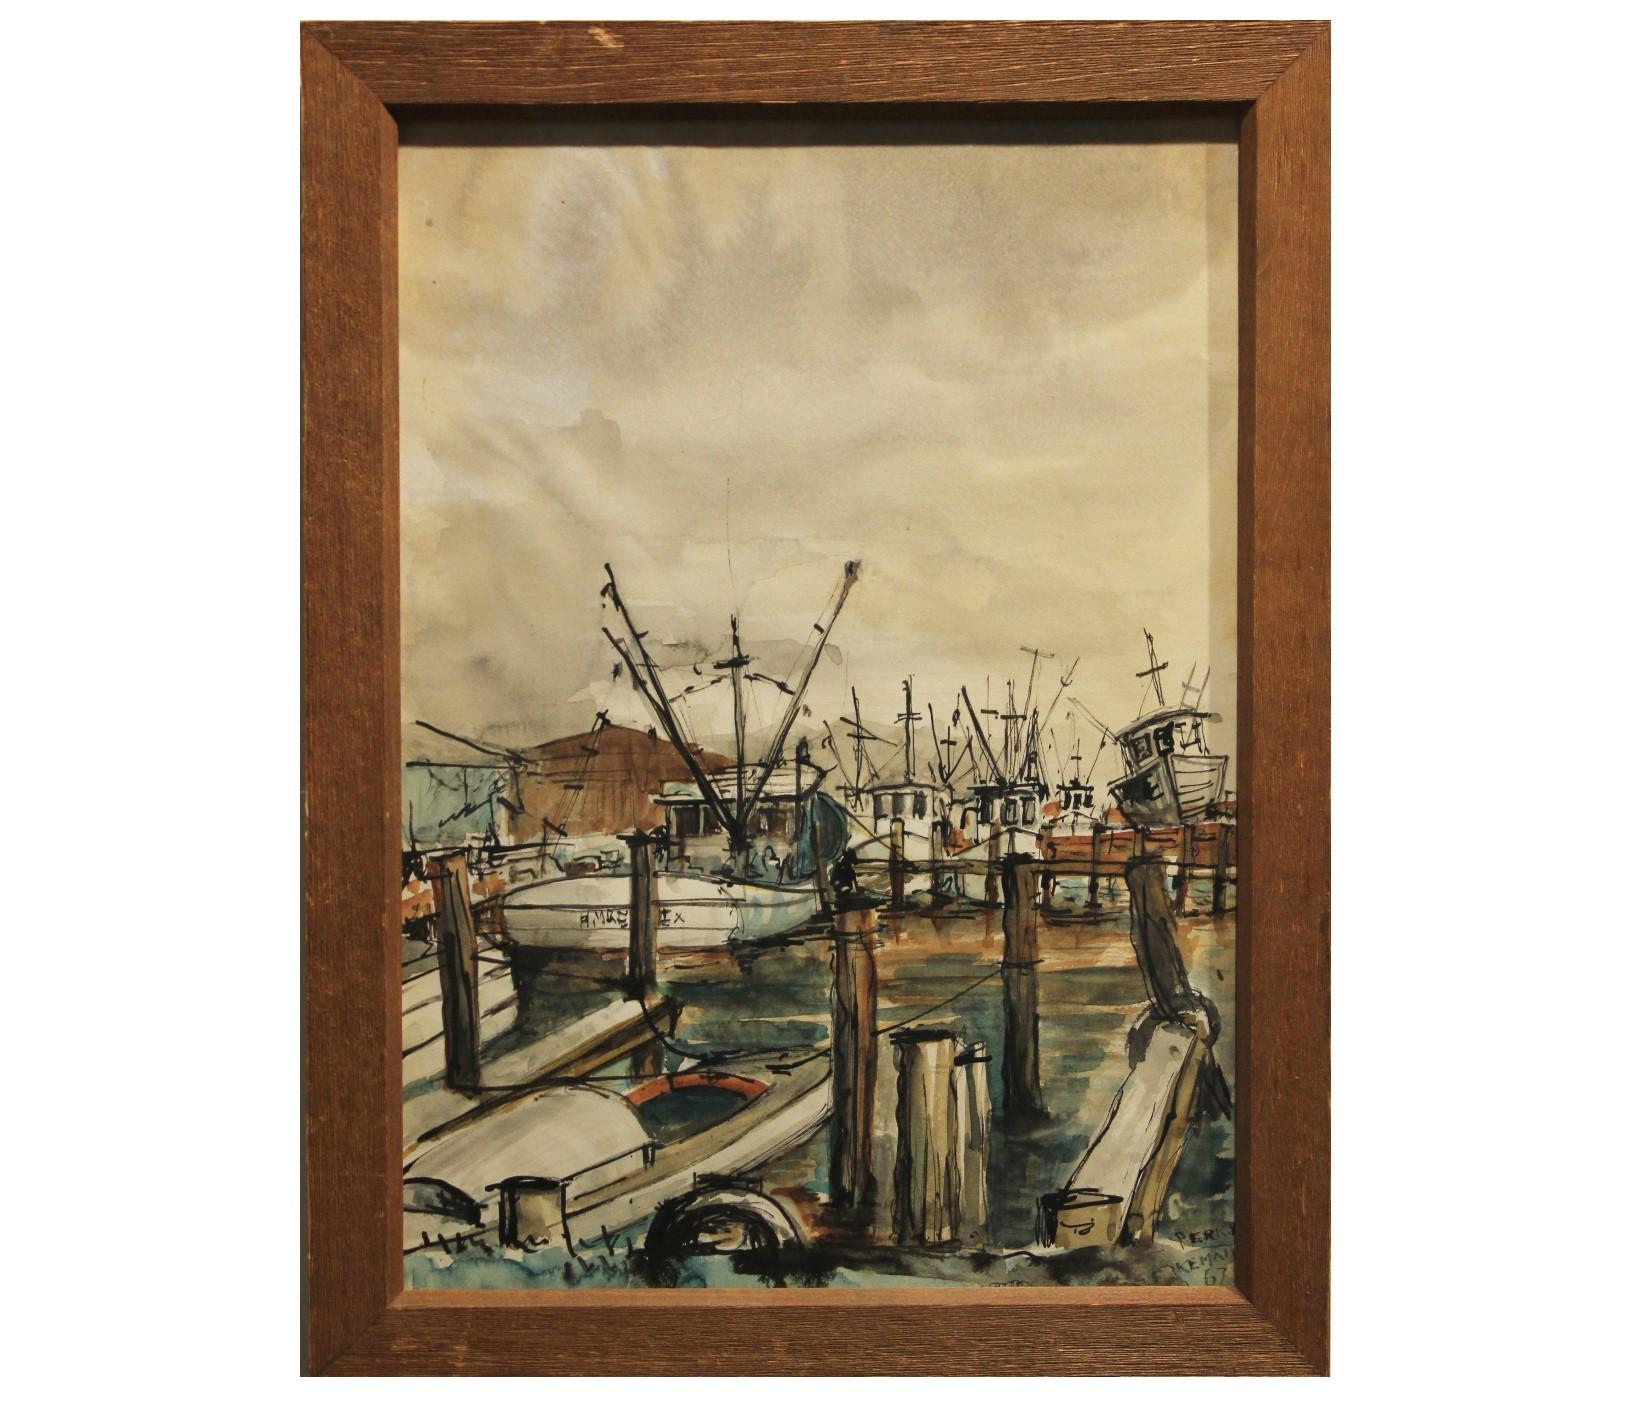 Perry Landscape Art - "Kemah" Seascape with Boats at the Dock